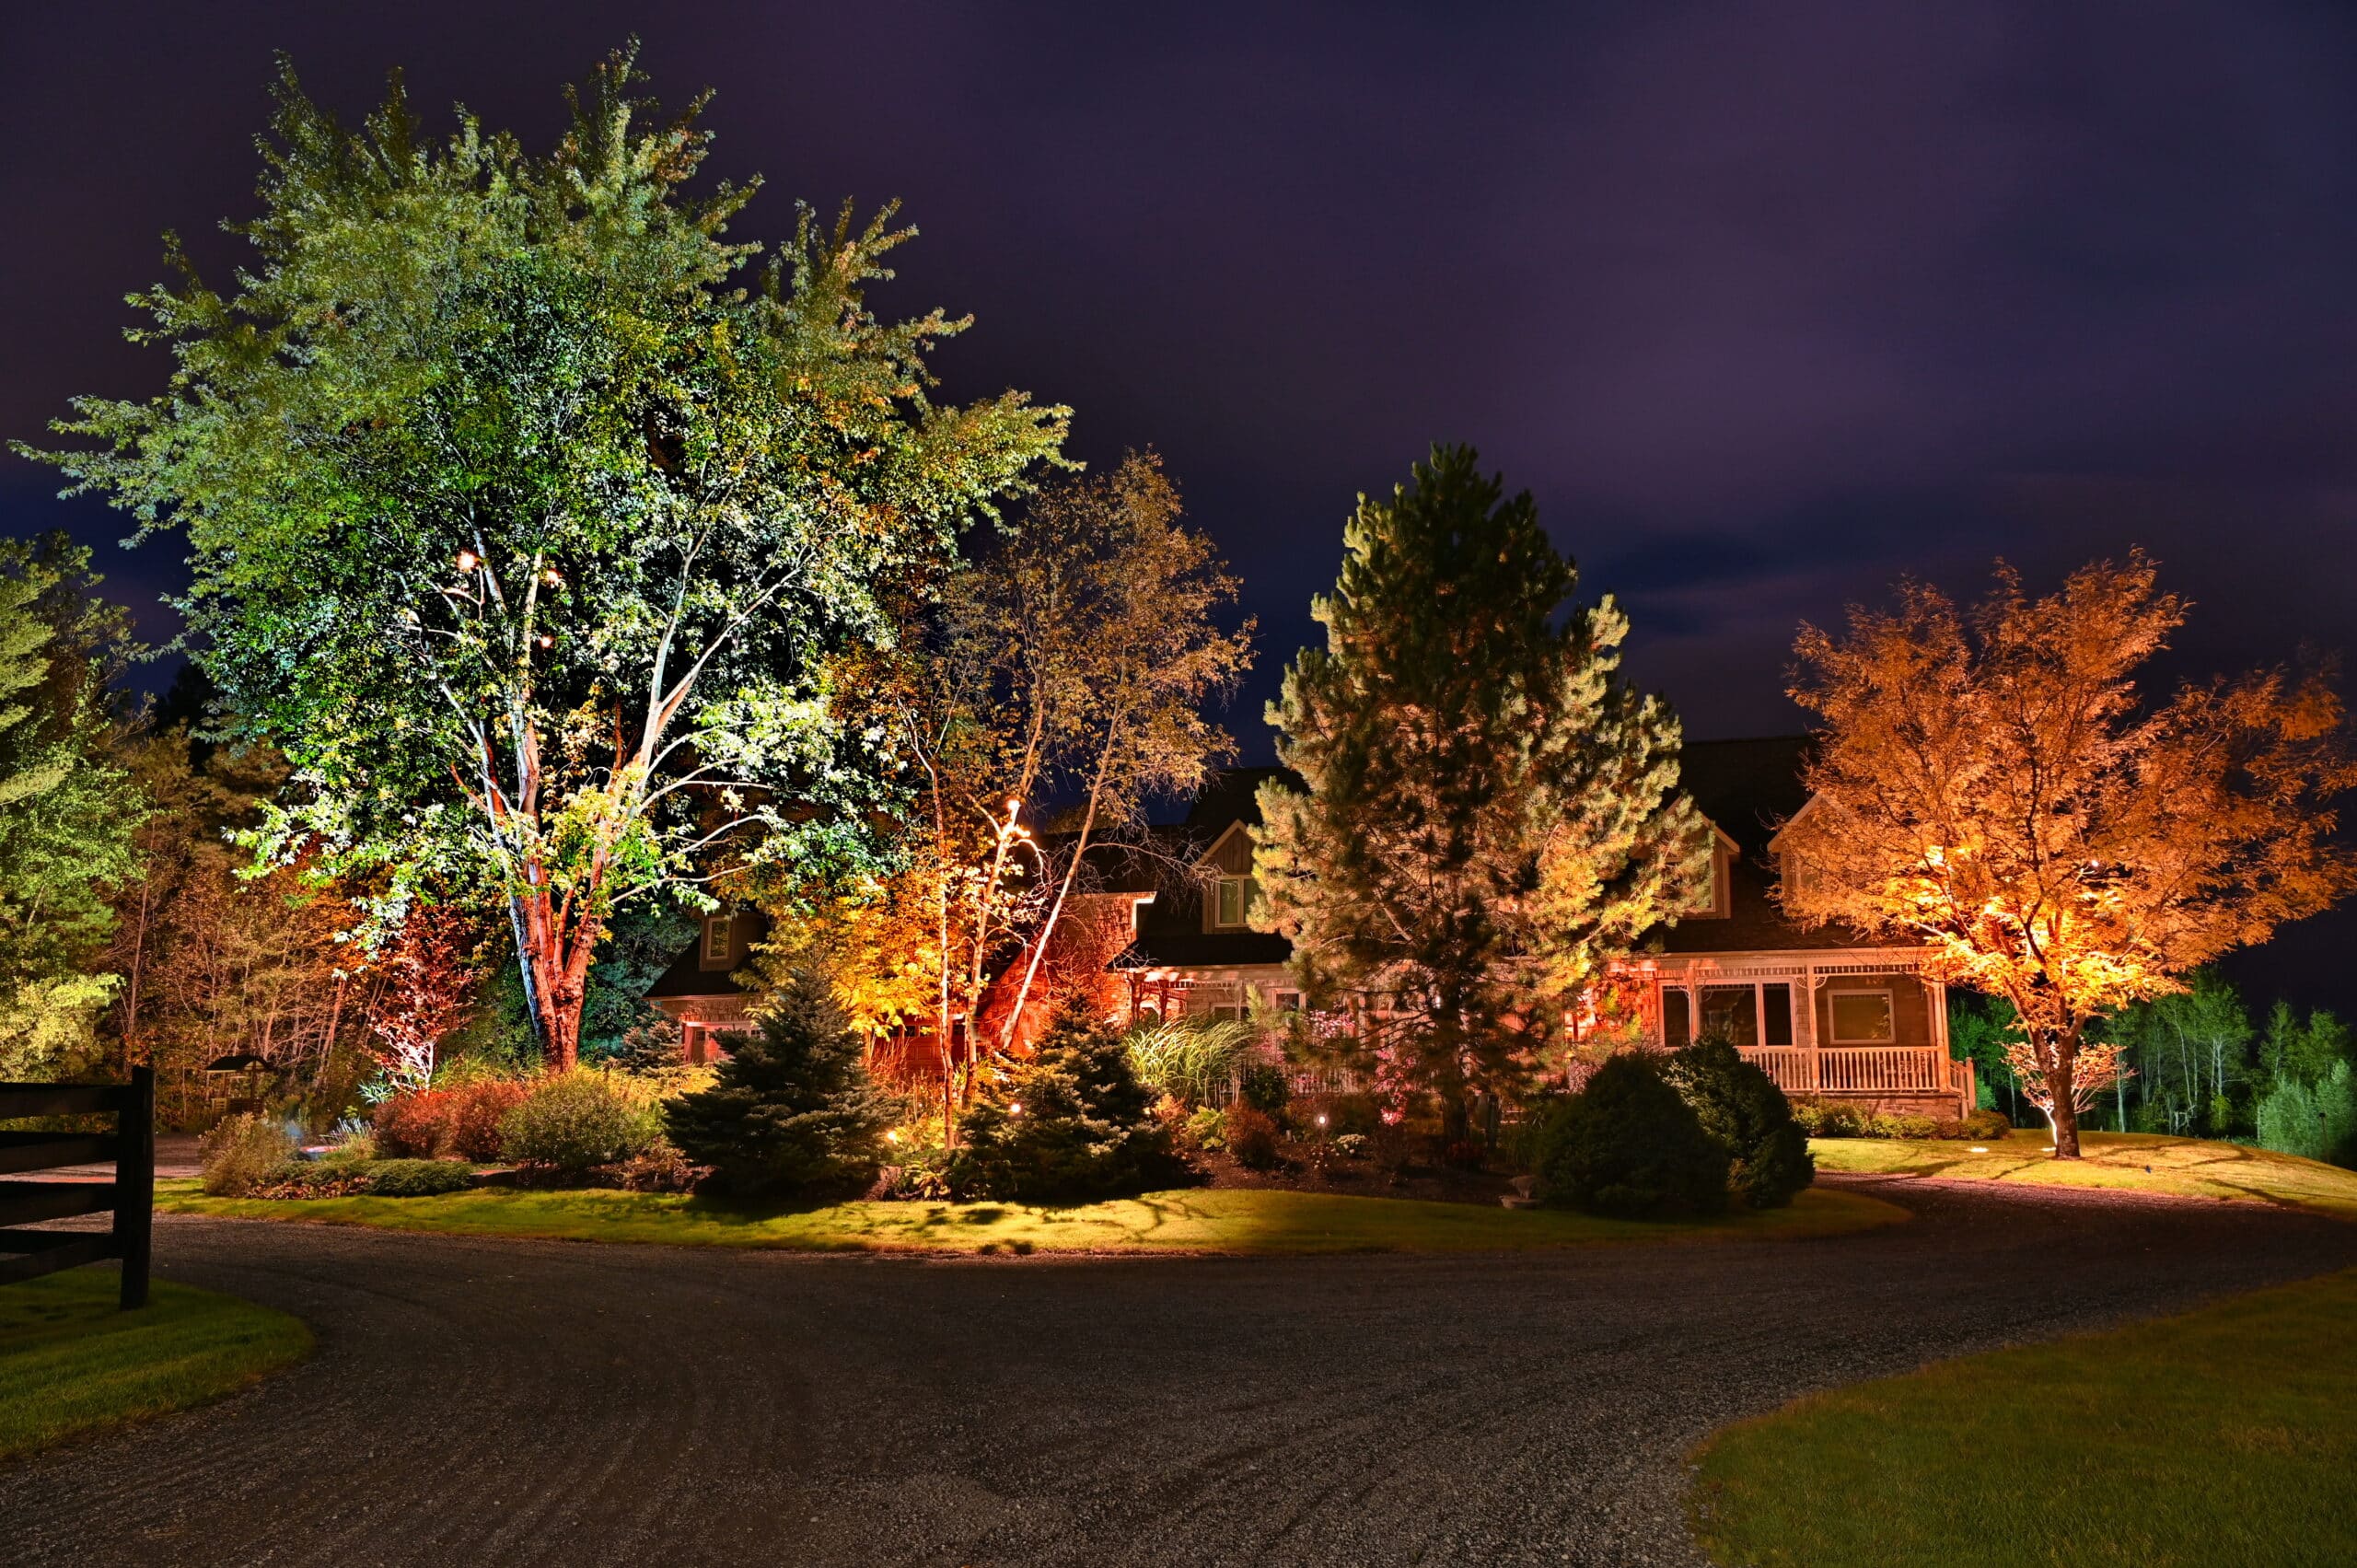 Illuminated trees in front of a house